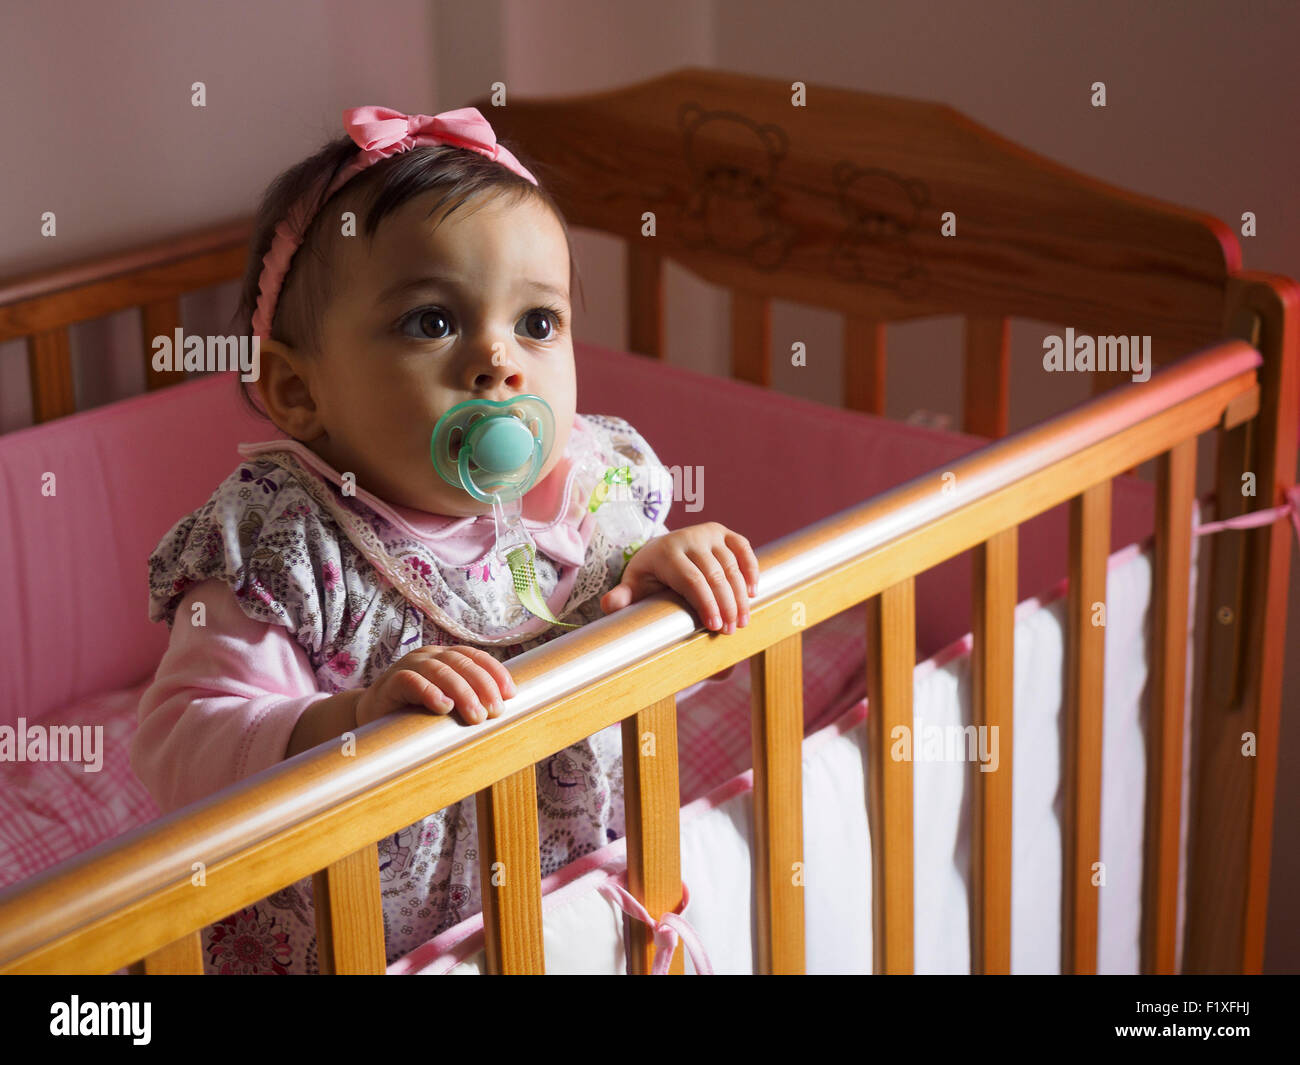 Baby girl with pacifier inside crib Stock Photo